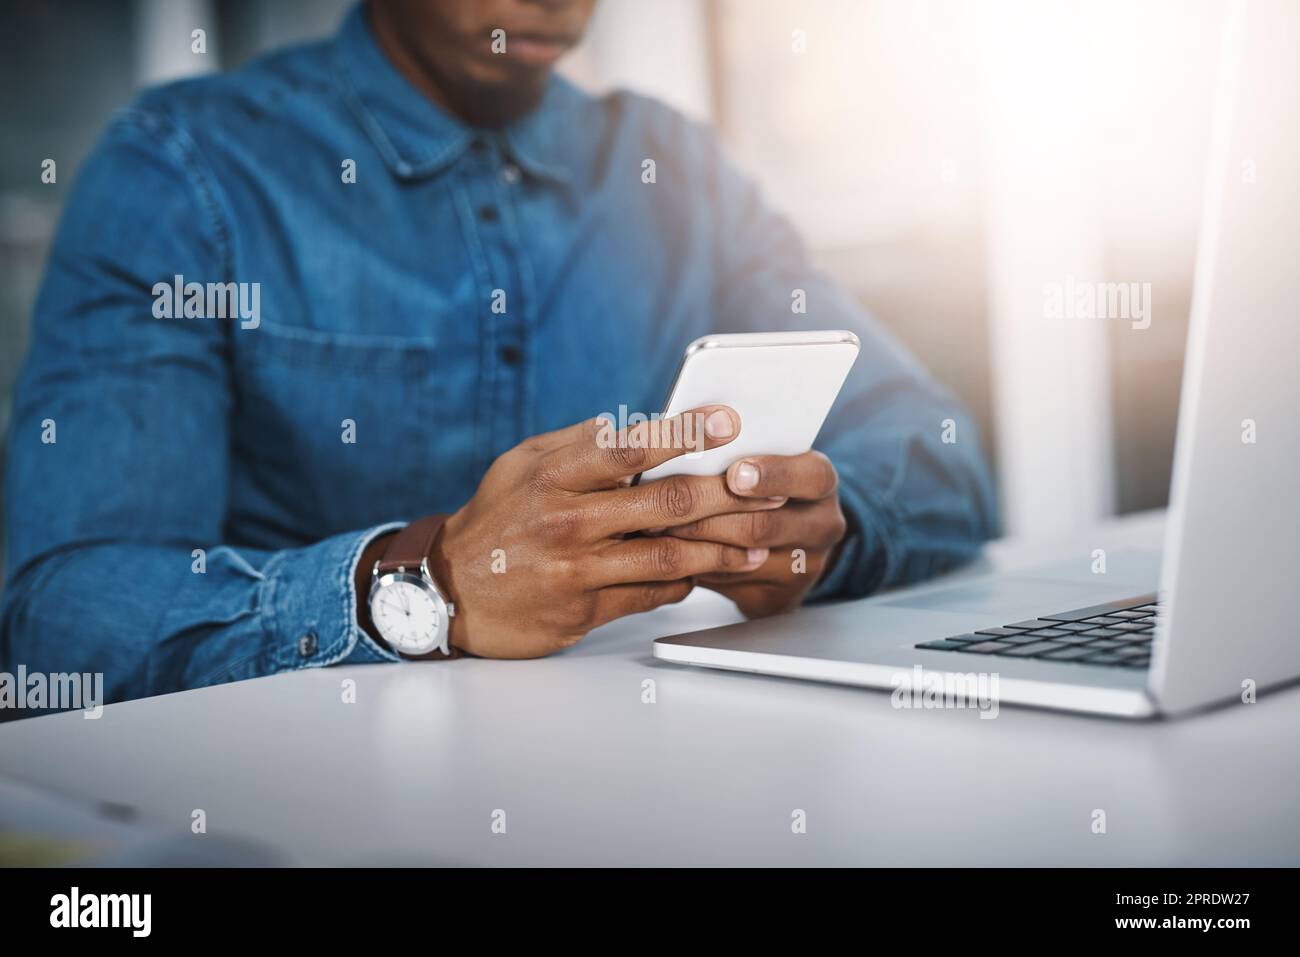 Handling business from multiple digital channels. Closeup shot of an unrecognizable businessman using a cellphone and laptop in an office. Stock Photo